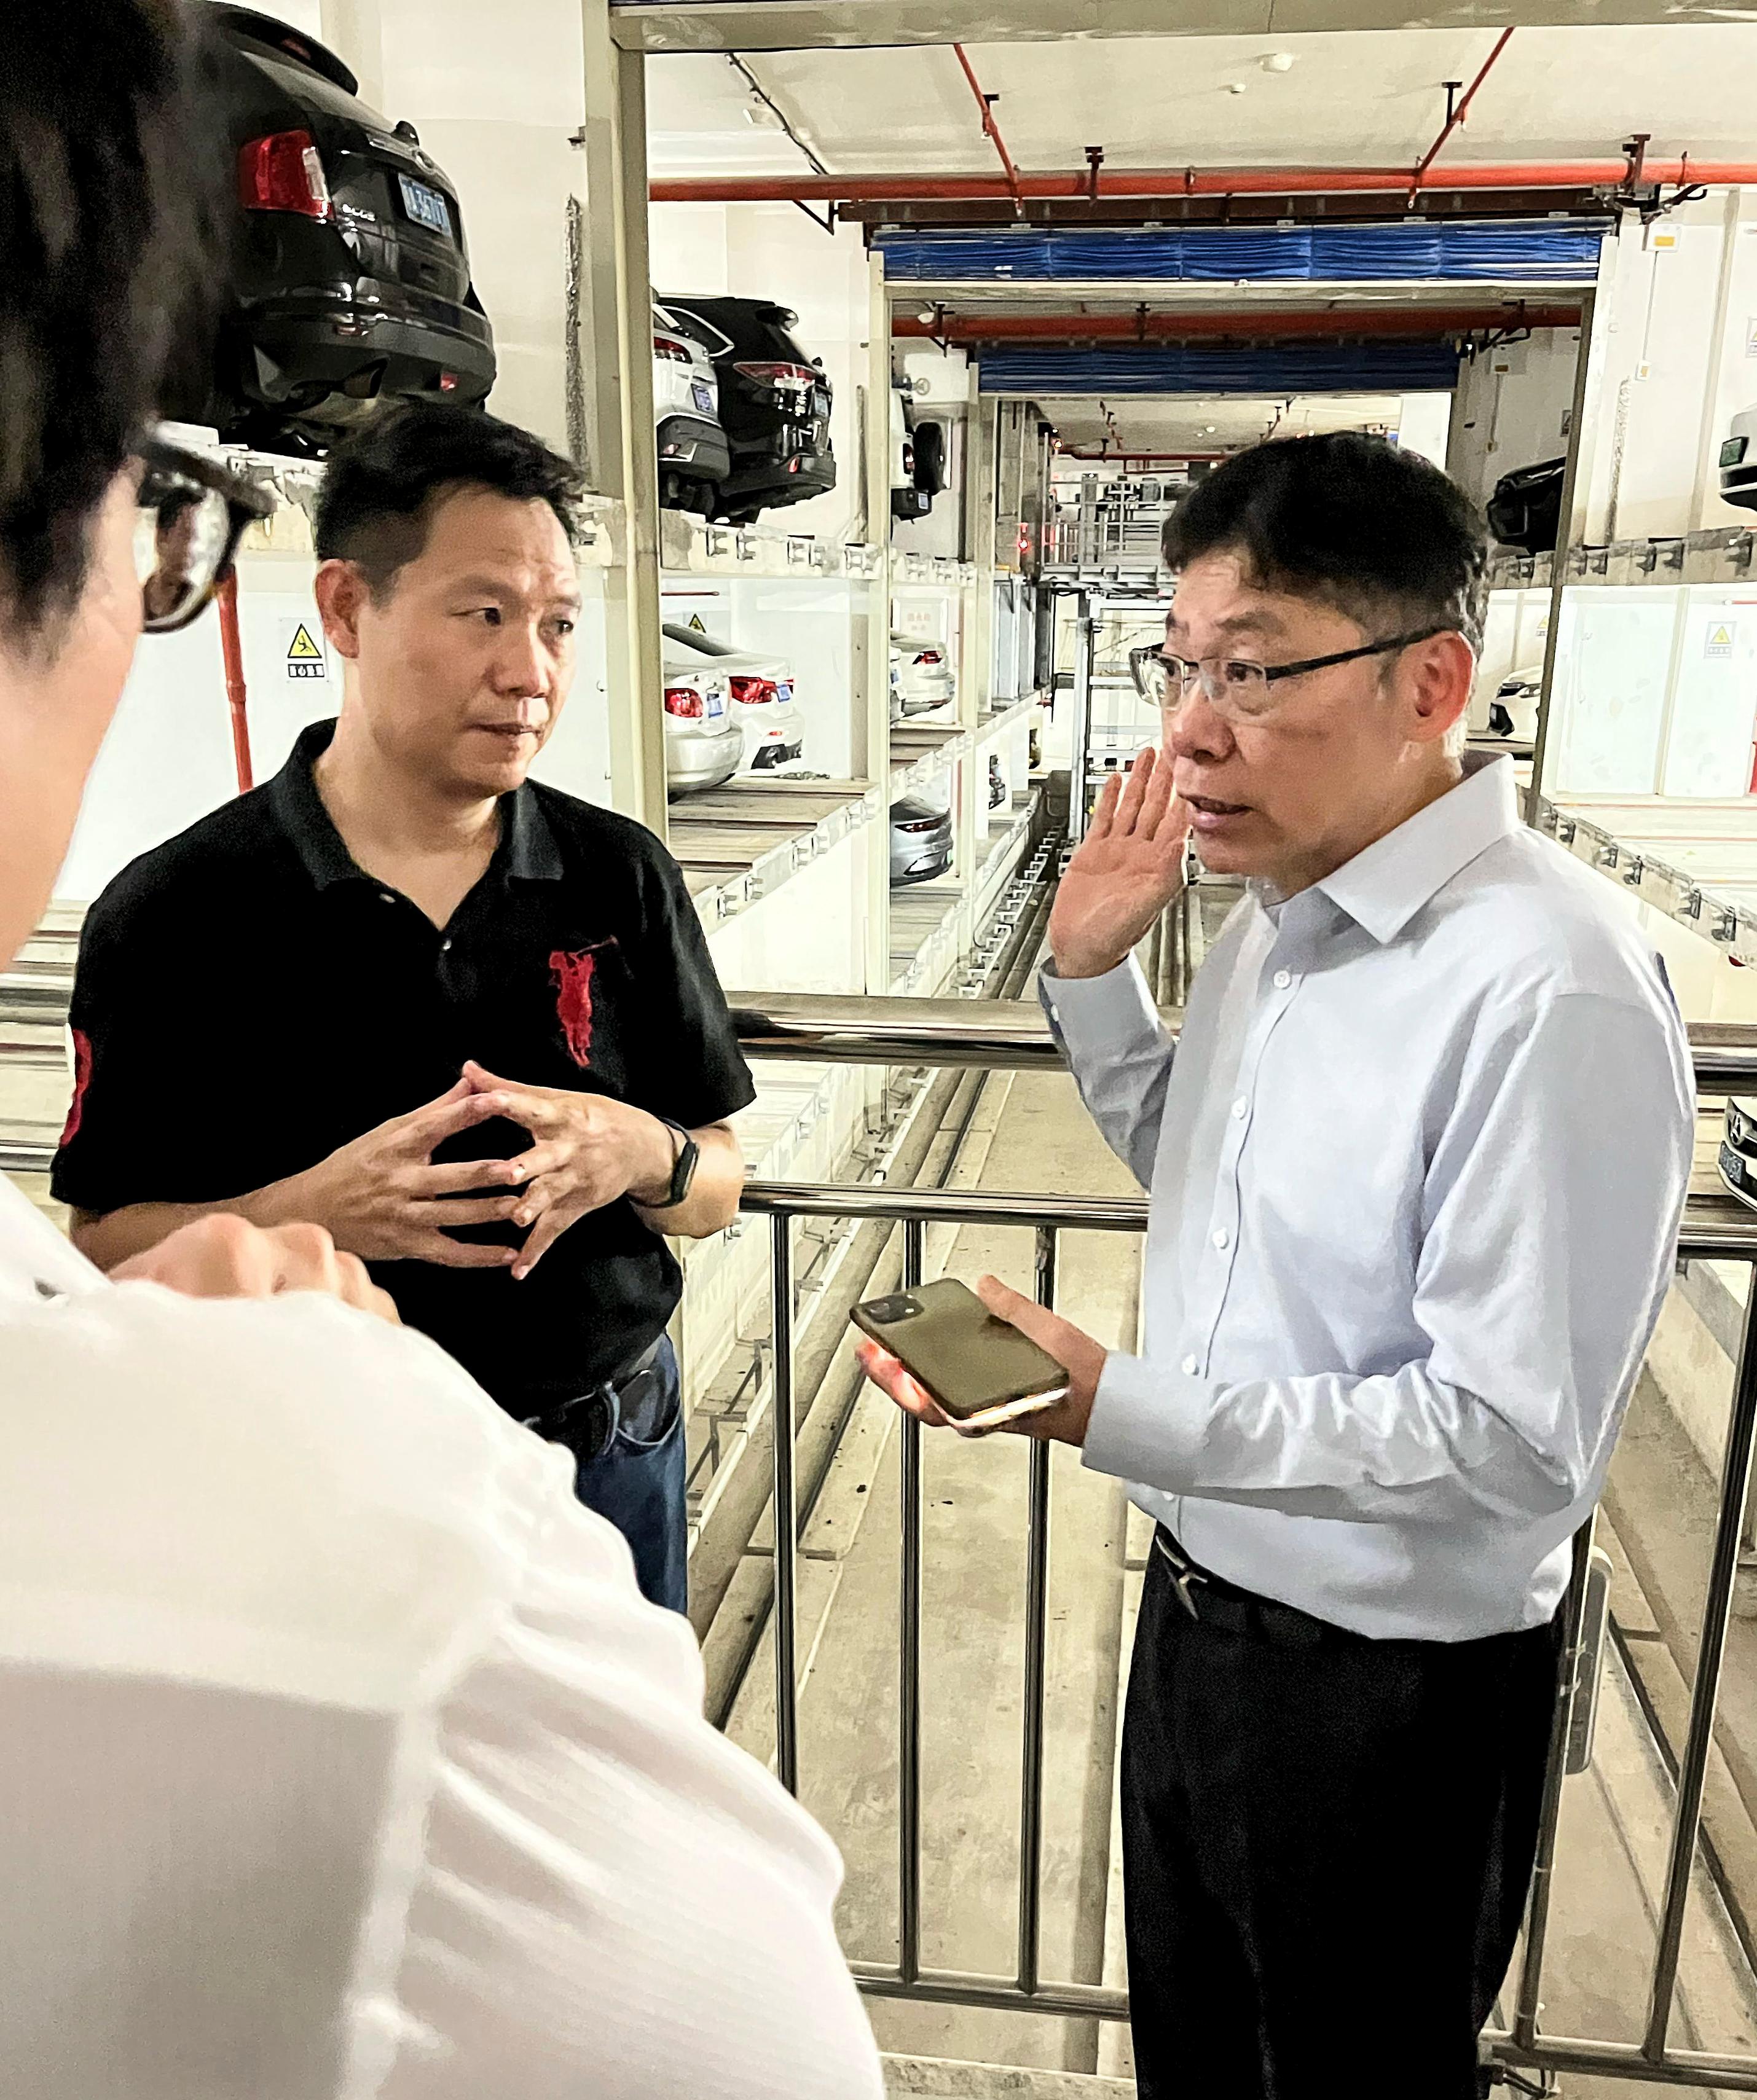 The Secretary for Transport and Logistics, Mr Lam Sai-hung, continued his visit to Guangzhou today (September 21) to gain a deeper understanding of the current situation and direction of smart mobility in Guangdong Province. Photo shows Mr Lam (right) getting an inside look at the operation of a large-scale underground parking system in Tianhe District, where it is normally off-limits to motorists.